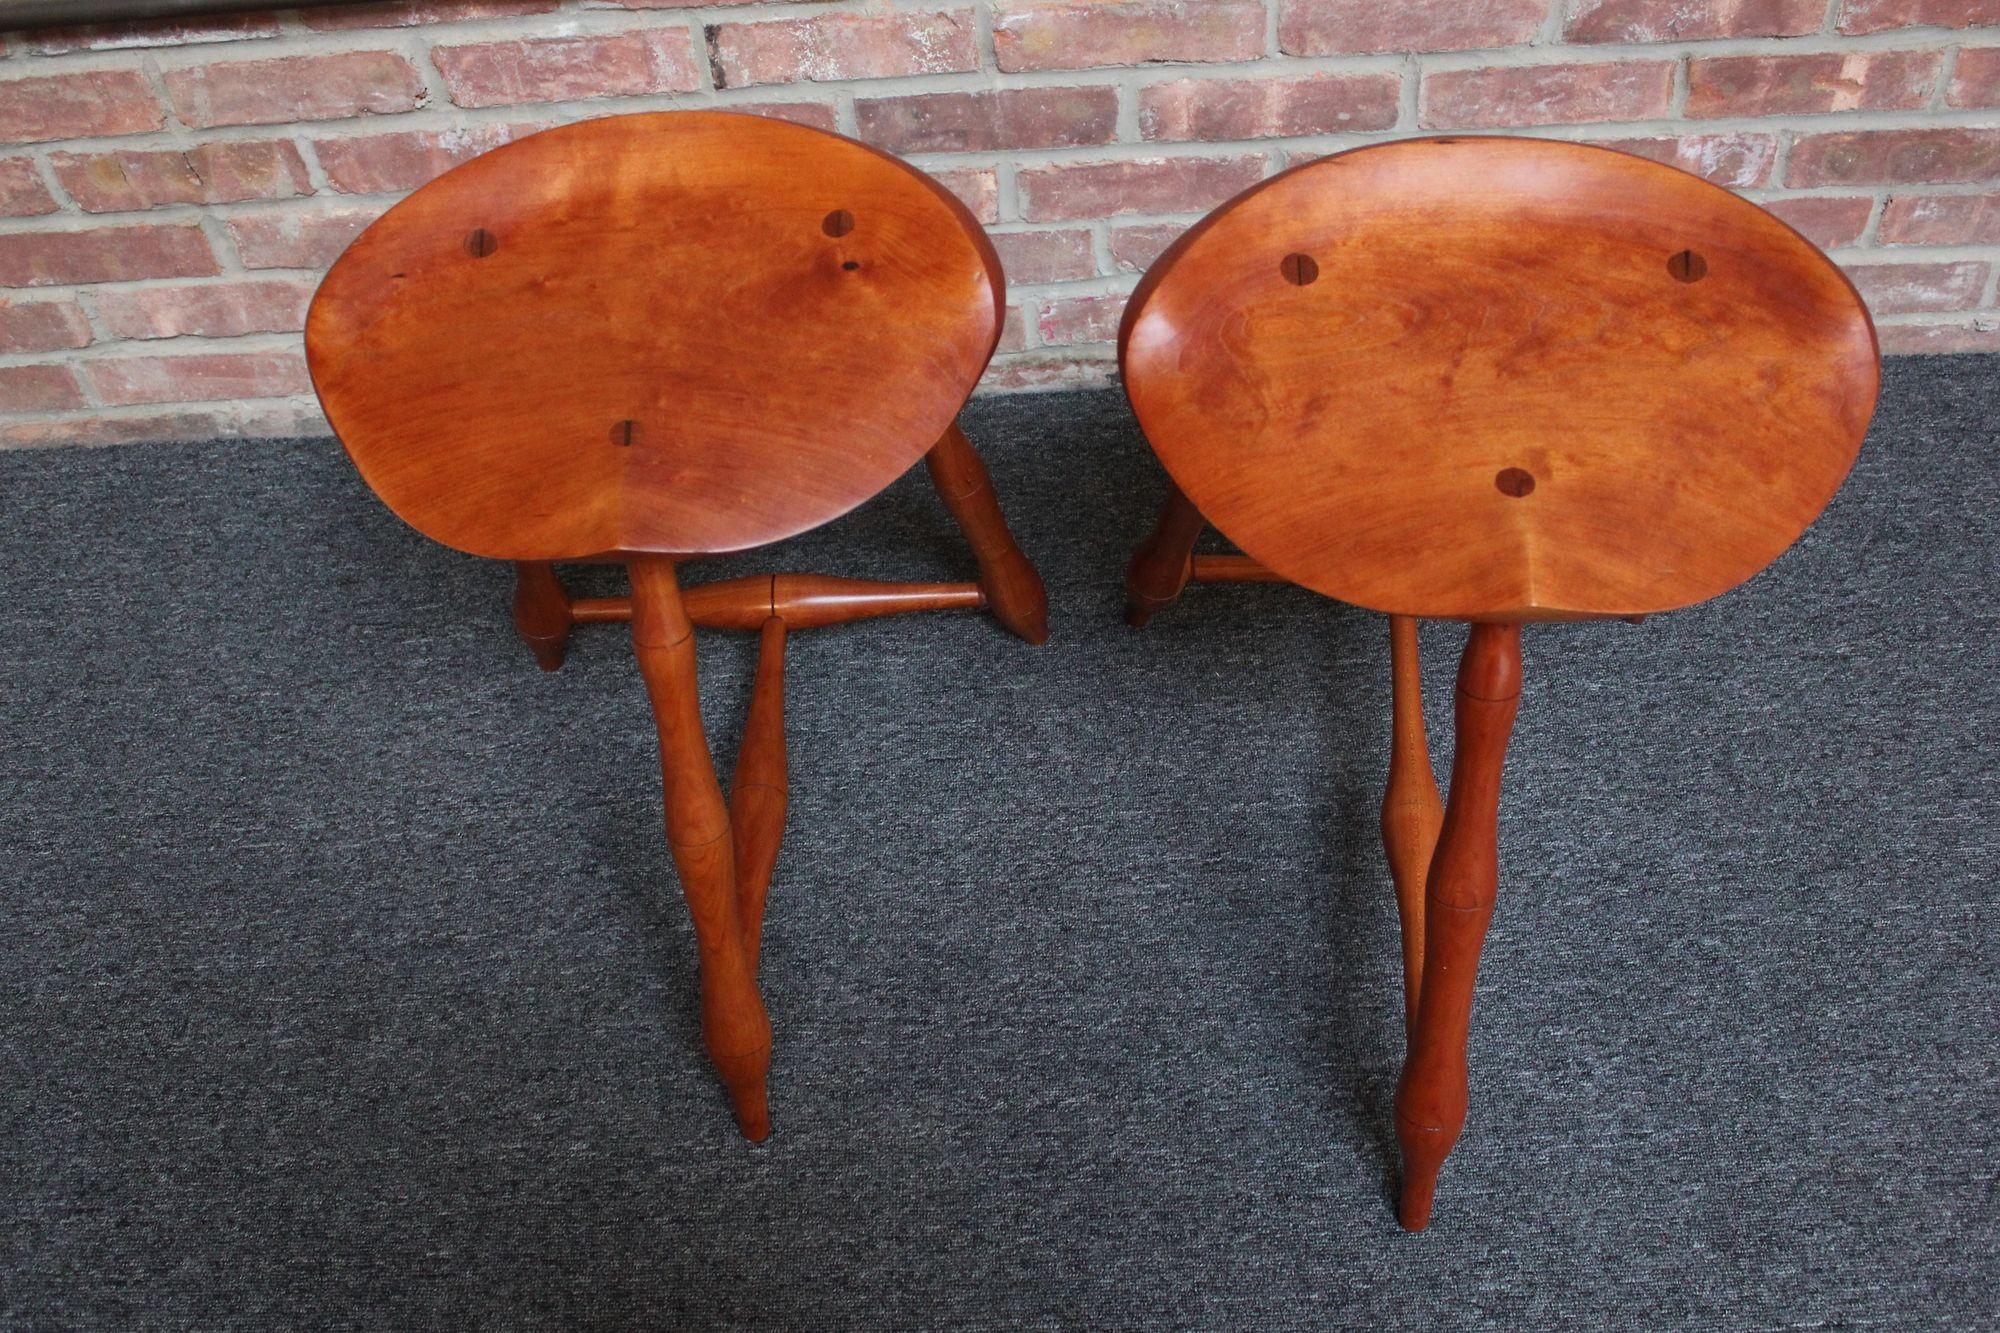 Pair of cherry wood studio craft low stools executed in a Windsor-Style (ca. 1970s, USA). Designed by a woodworker out of Syracuse, New York 